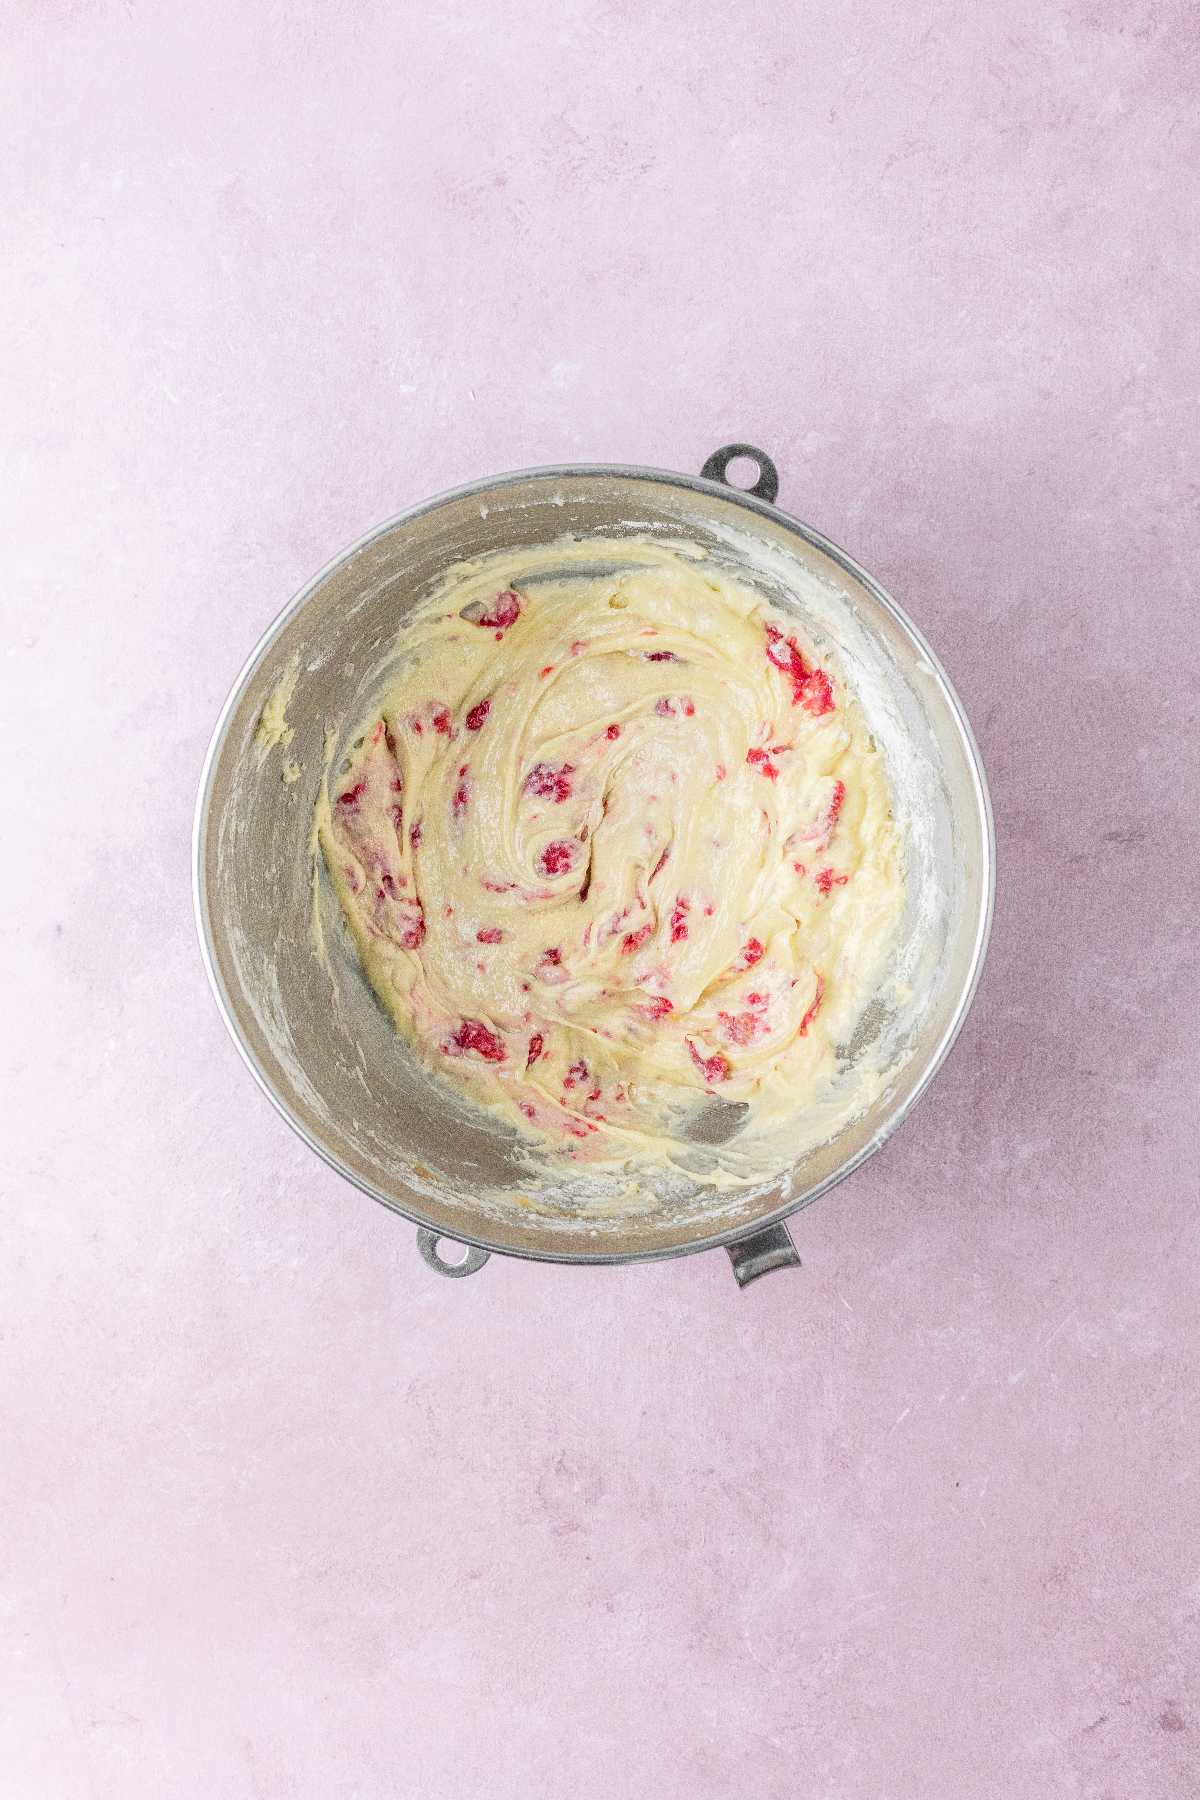 Raspberry cupcake batter in a large bowl.